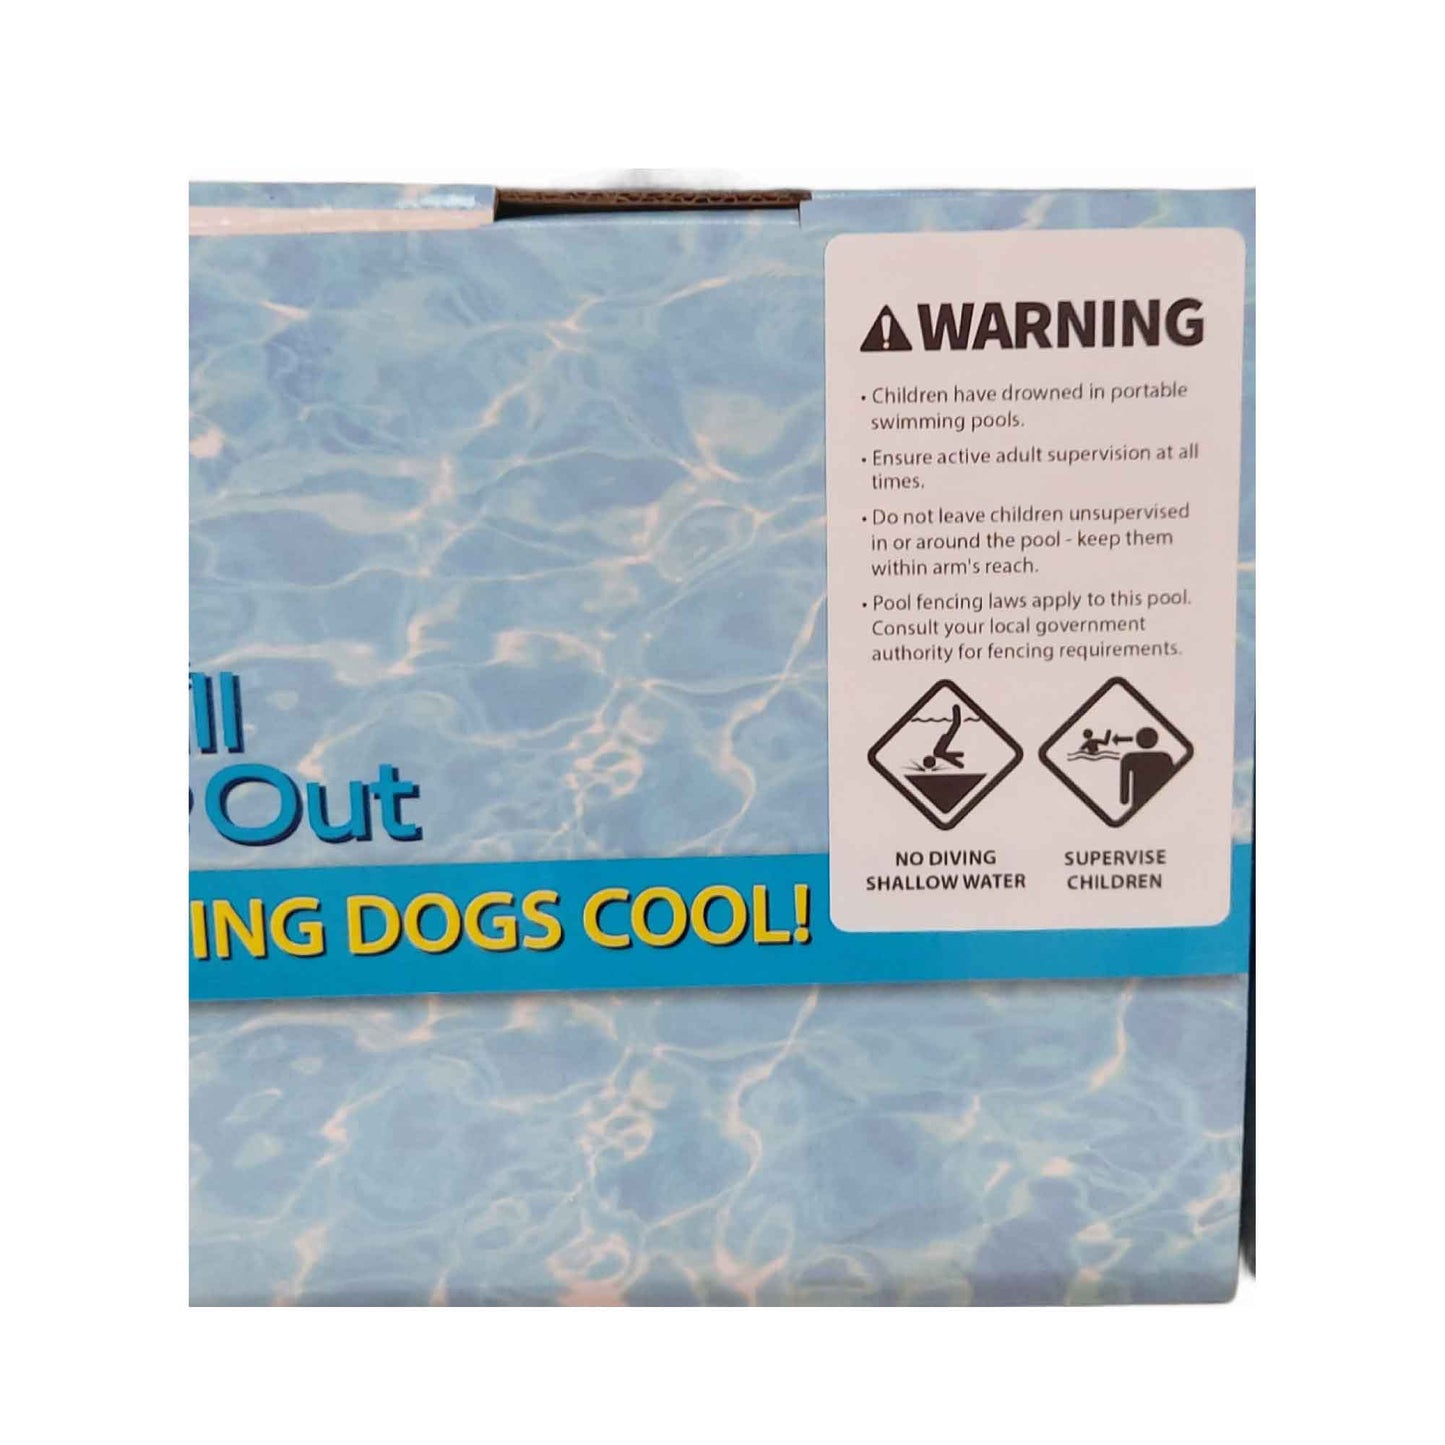 L Dog Swimming Pool Pet Chill Out Plastic Puppy Bath Splash Fun All For Paws